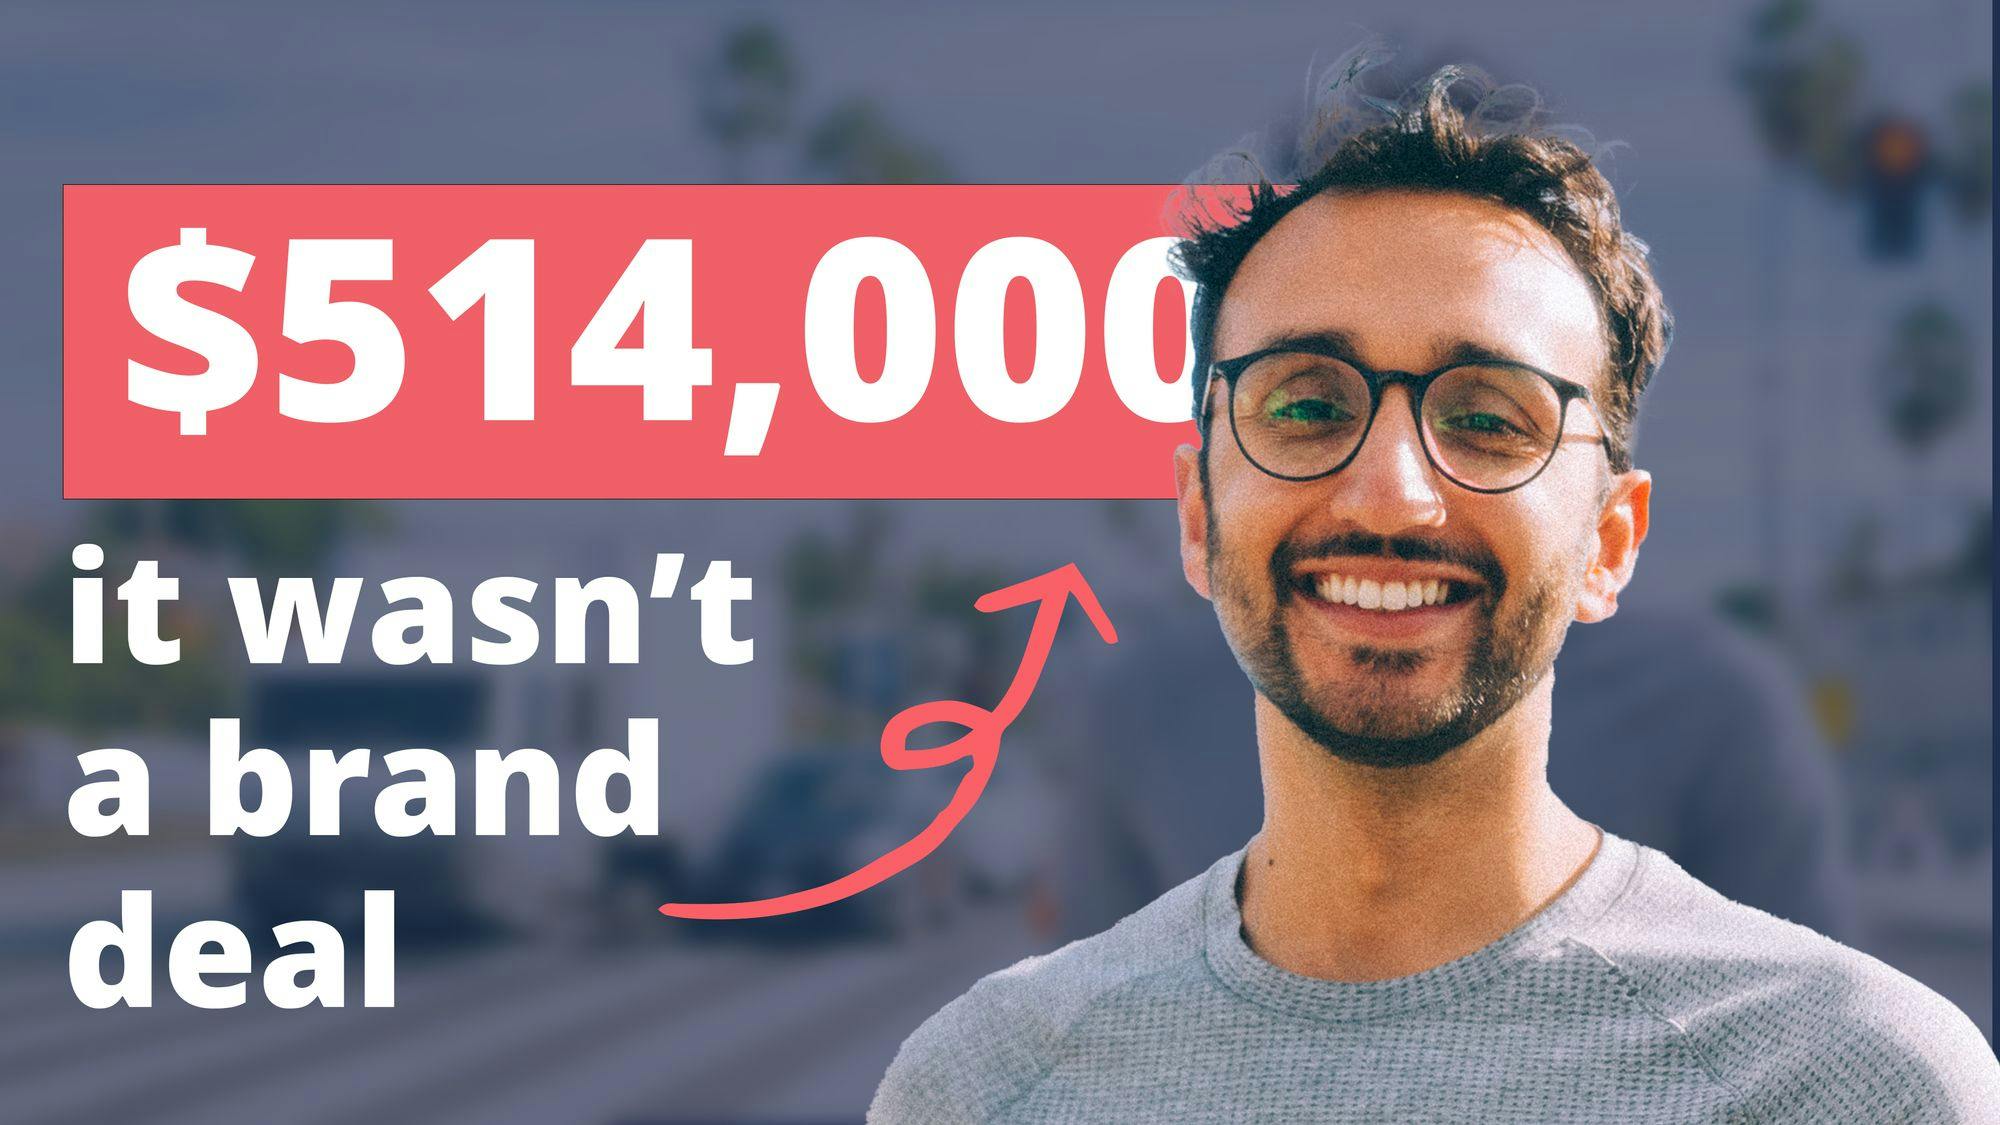 How Ali Abdaal made $514,000 in 4 days